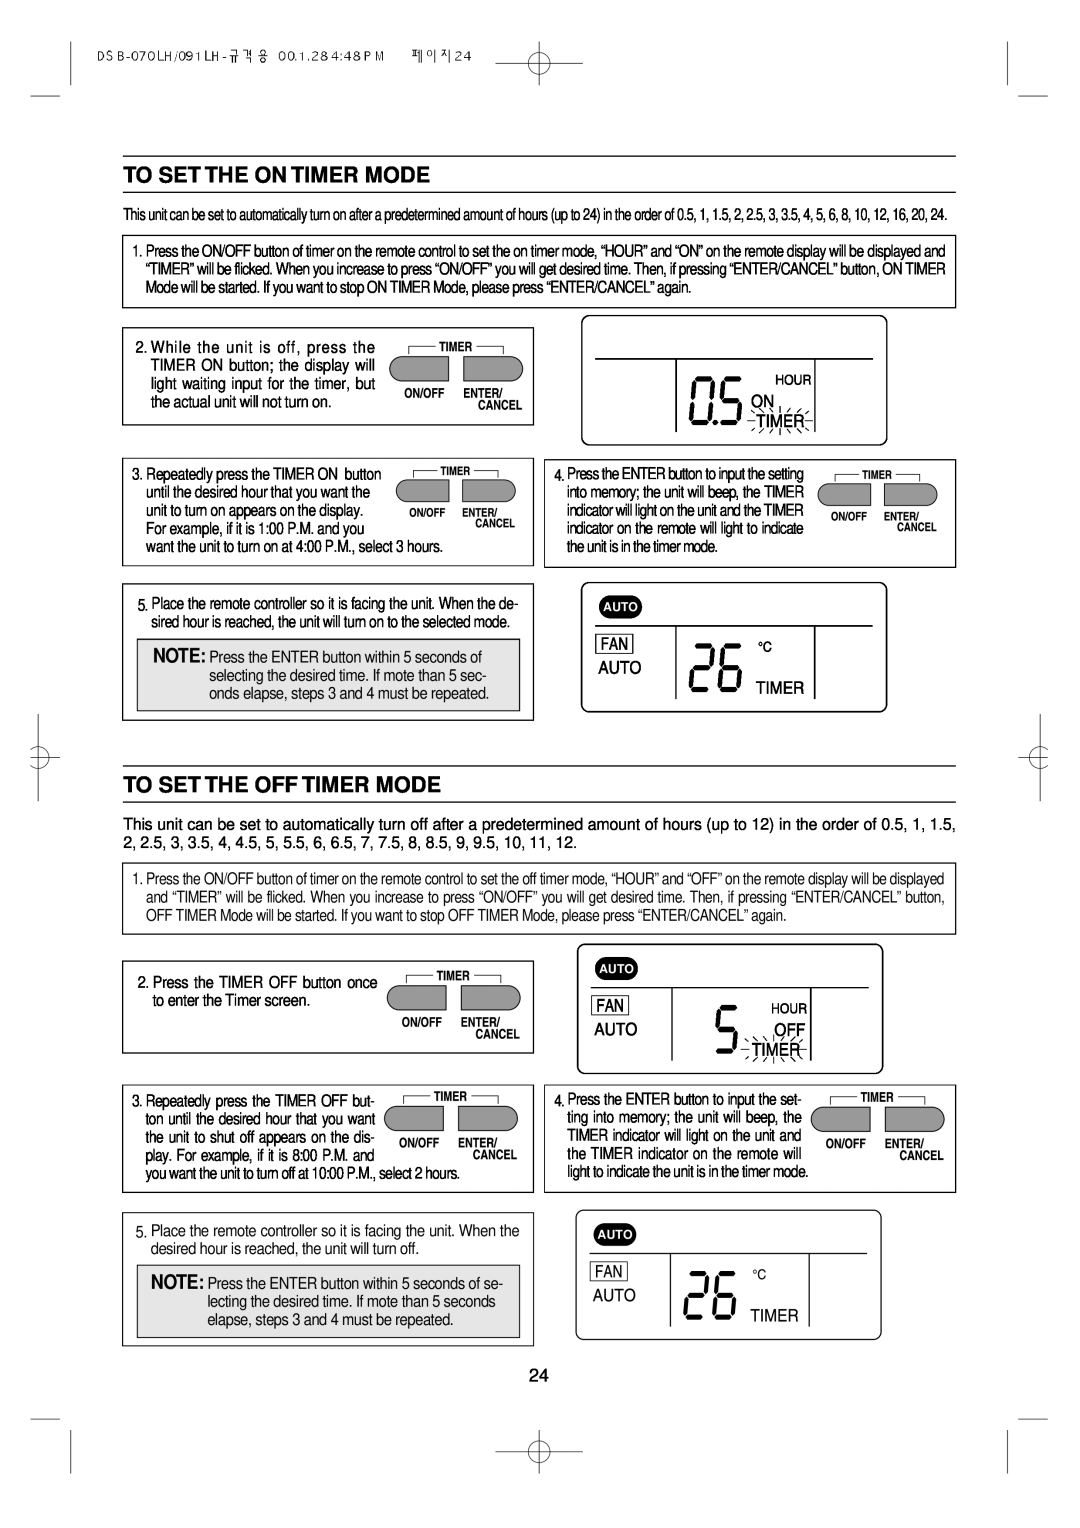 Daewoo Split Airconditioning System, DSB-071LH owner manual To Set The On Timer Mode, To Set The Off Timer Mode 